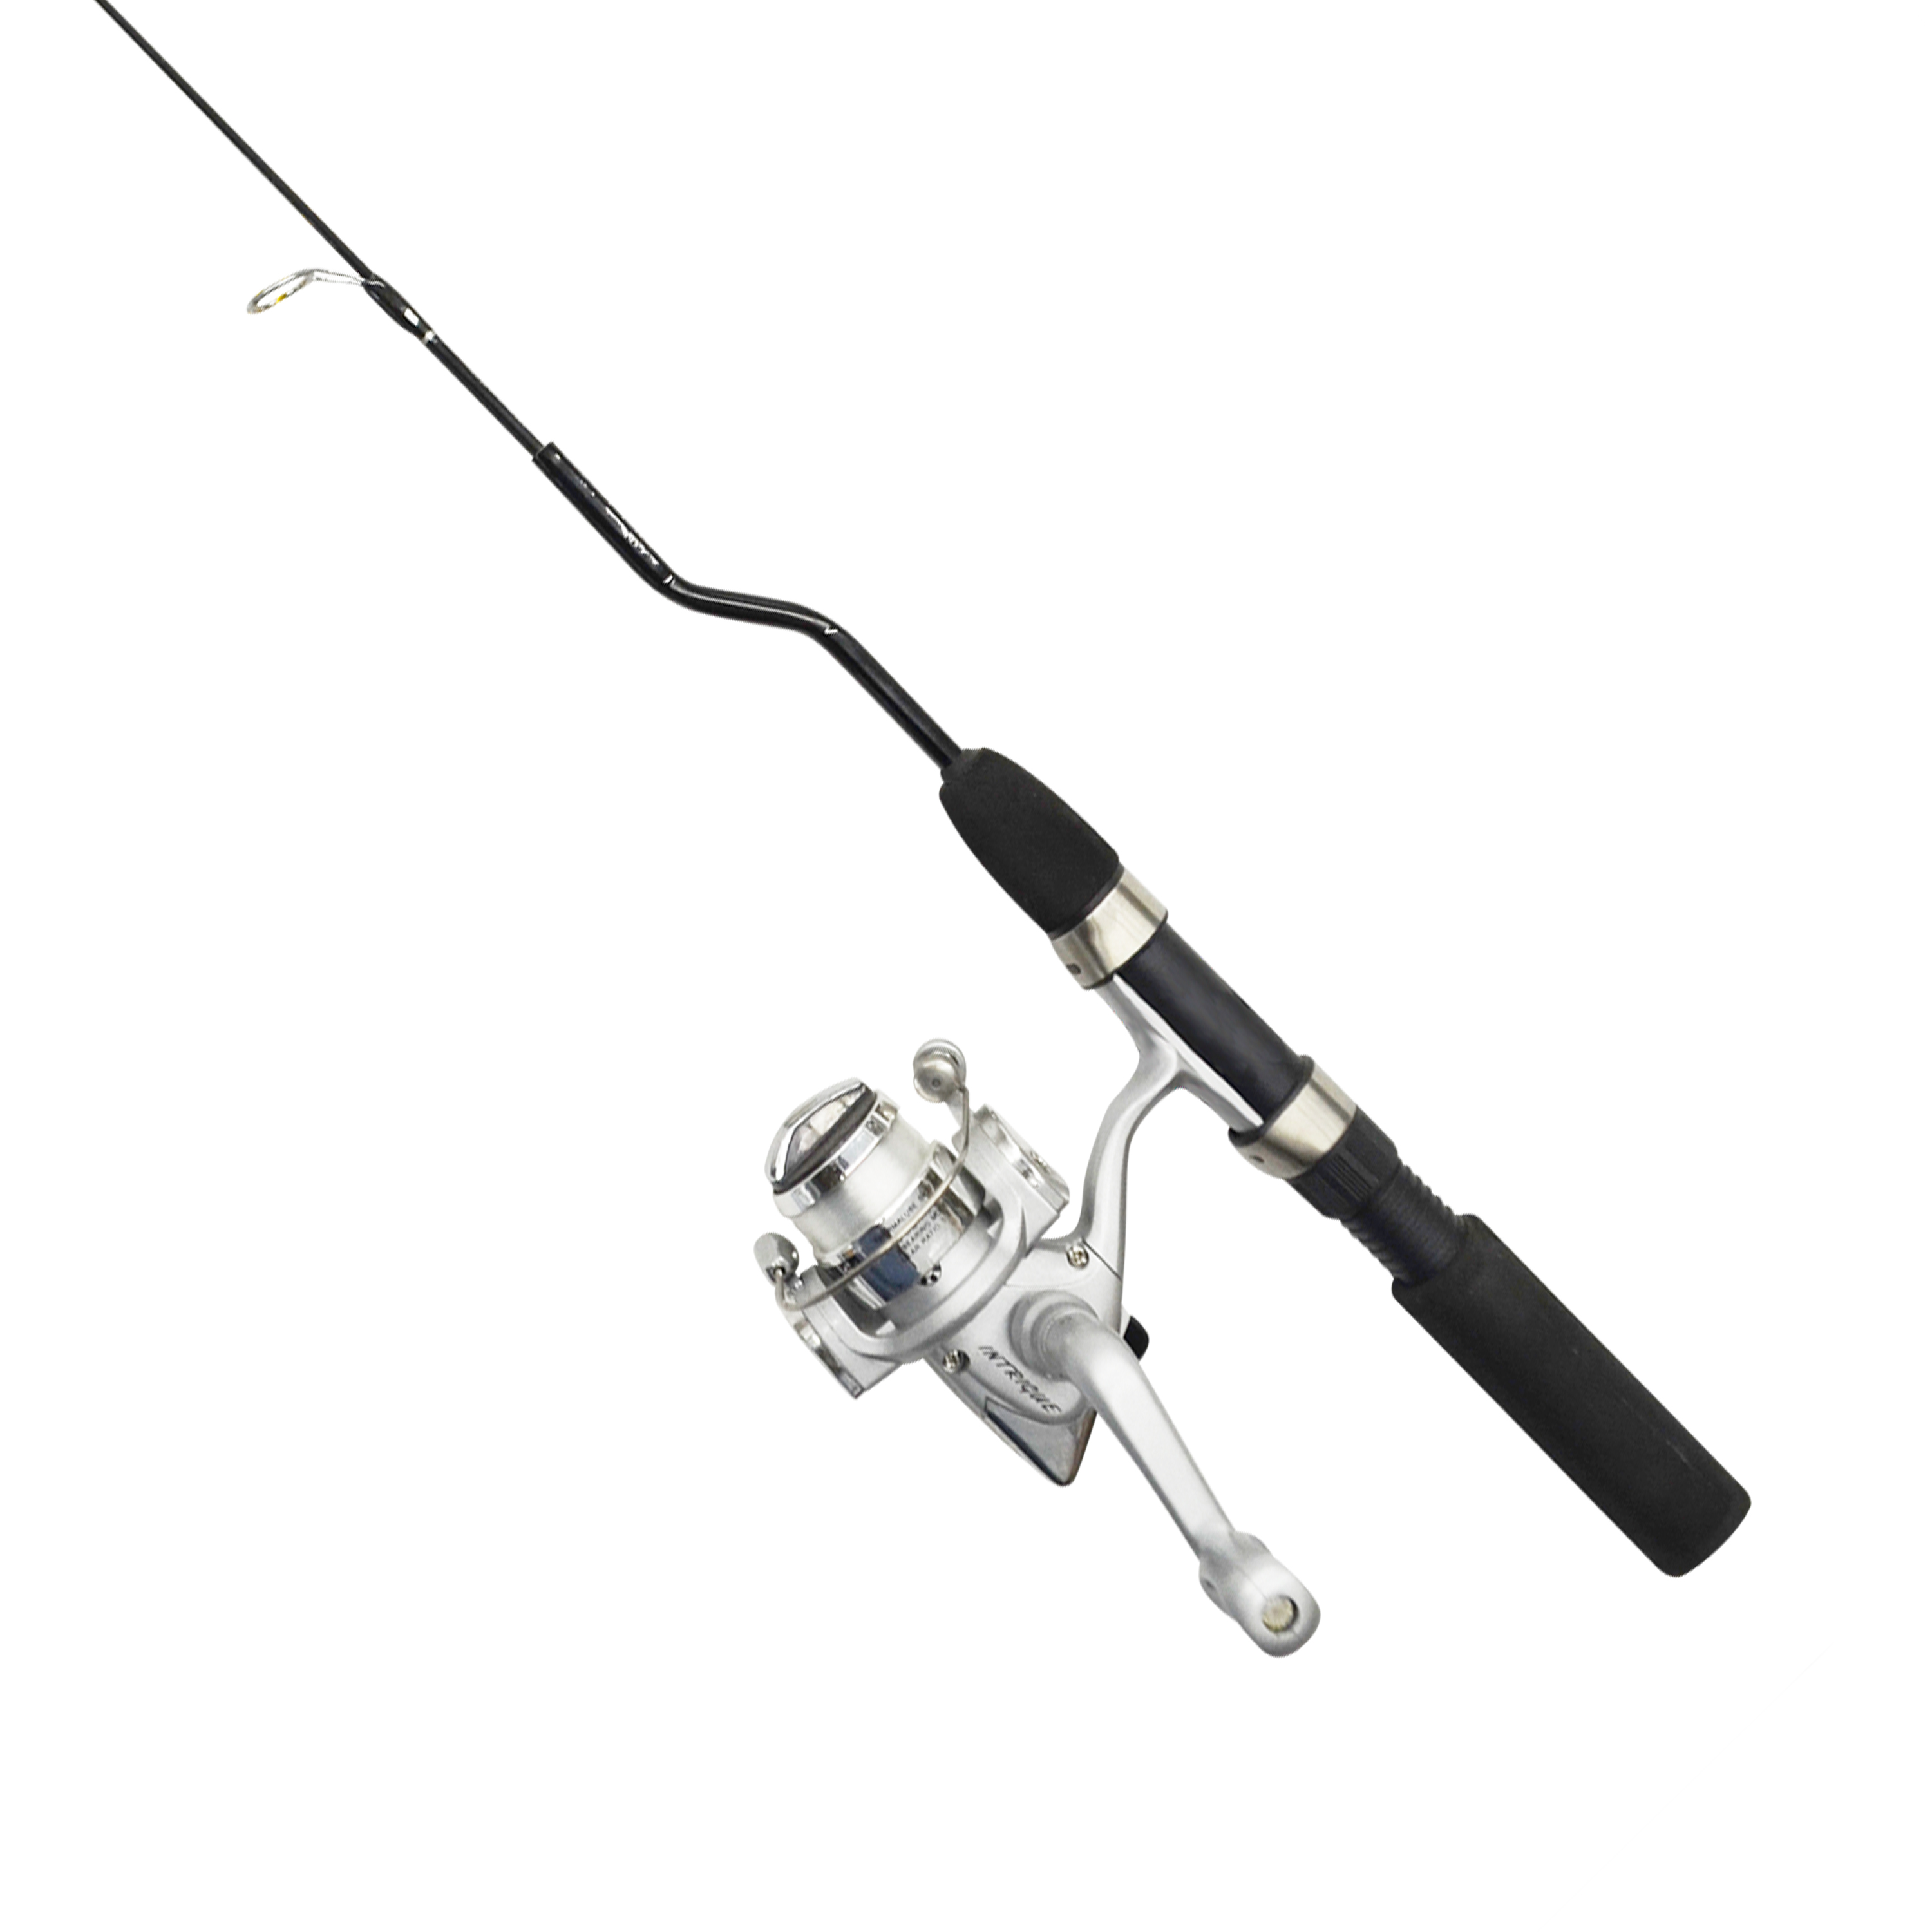 HT Enterprises Slick Ice Fishing Rod and Reel Combo, 28" Medium Action Rod and Reel - image 2 of 3